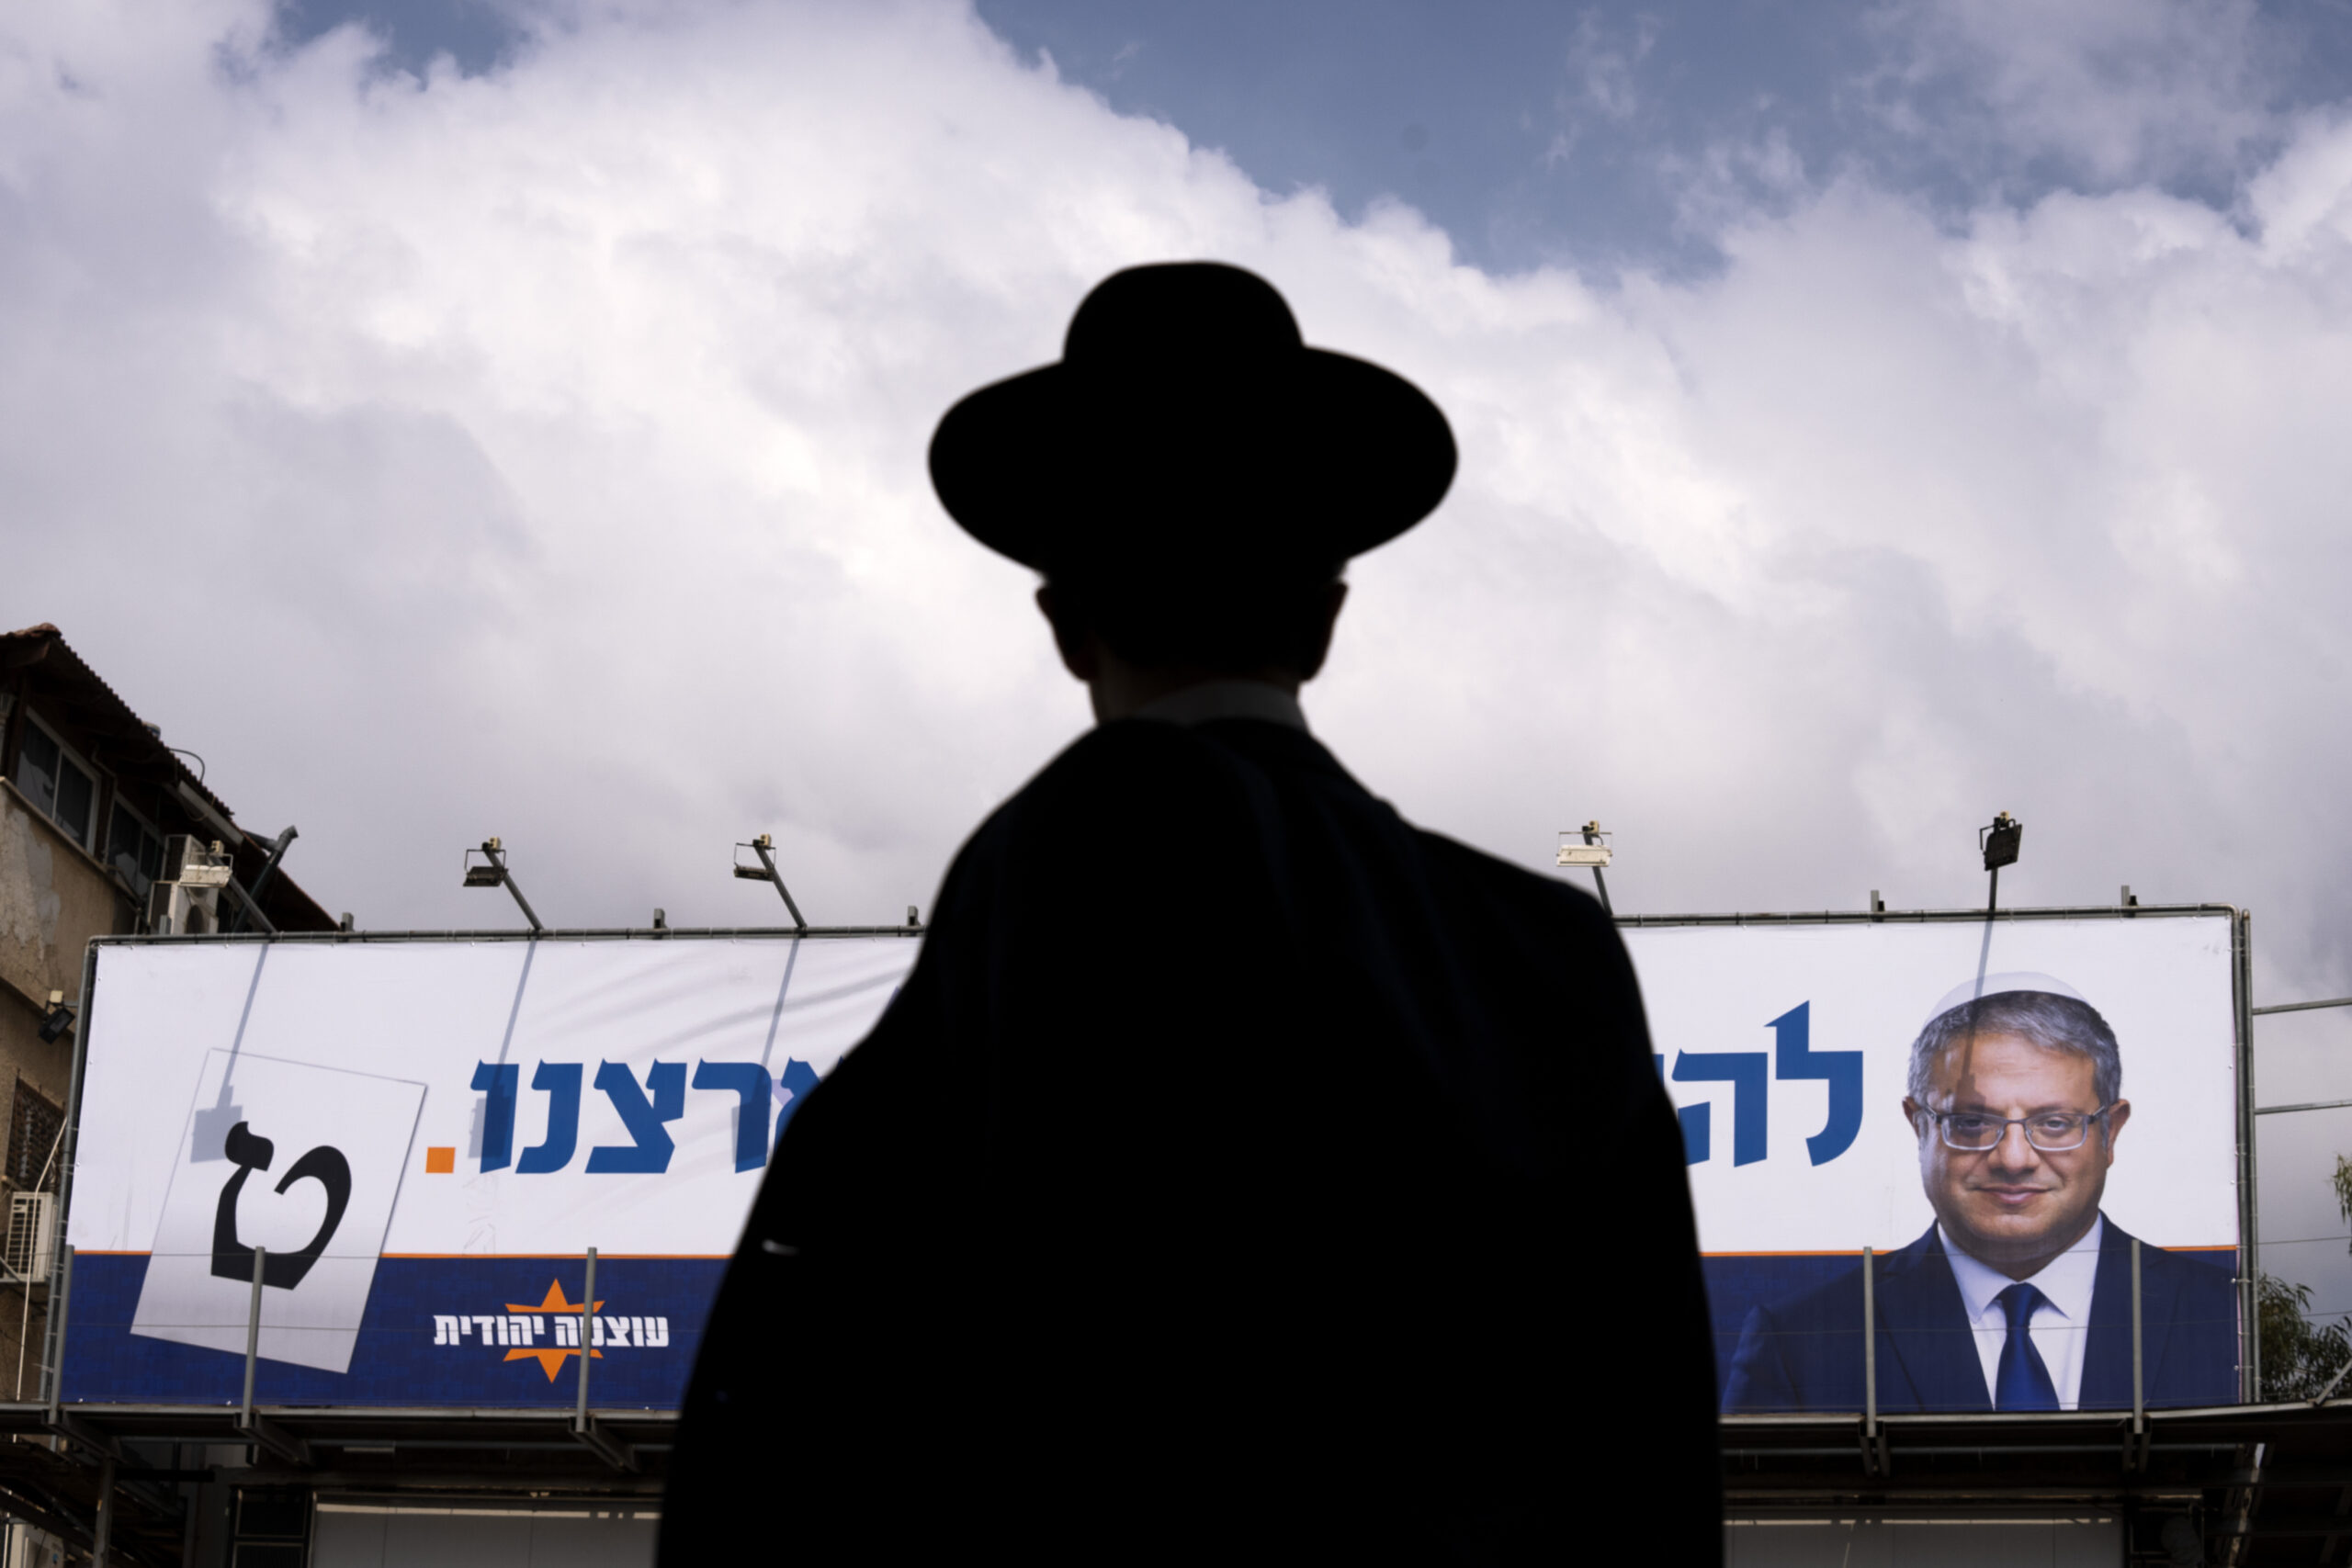 An ultra-Orthodox Jewish man walks by an election campaign billboard showing Itamar Ben-Gvir, Israeli far-right lawmaker and the head of "Jewish Power" party, in Bnei Brak, Israel Monday, Oct. 24, 2022. Israel is holding its fourth election in less than two years. Israel's most extremist politician, known for his inflammatory anti-Arab speeches and stunts, is attracting new supporters from a previously untapped demographic young ultra-Orthodox Jews, one of the fastest-growing segments of the country's population. (AP Photo/Oded Balilty)